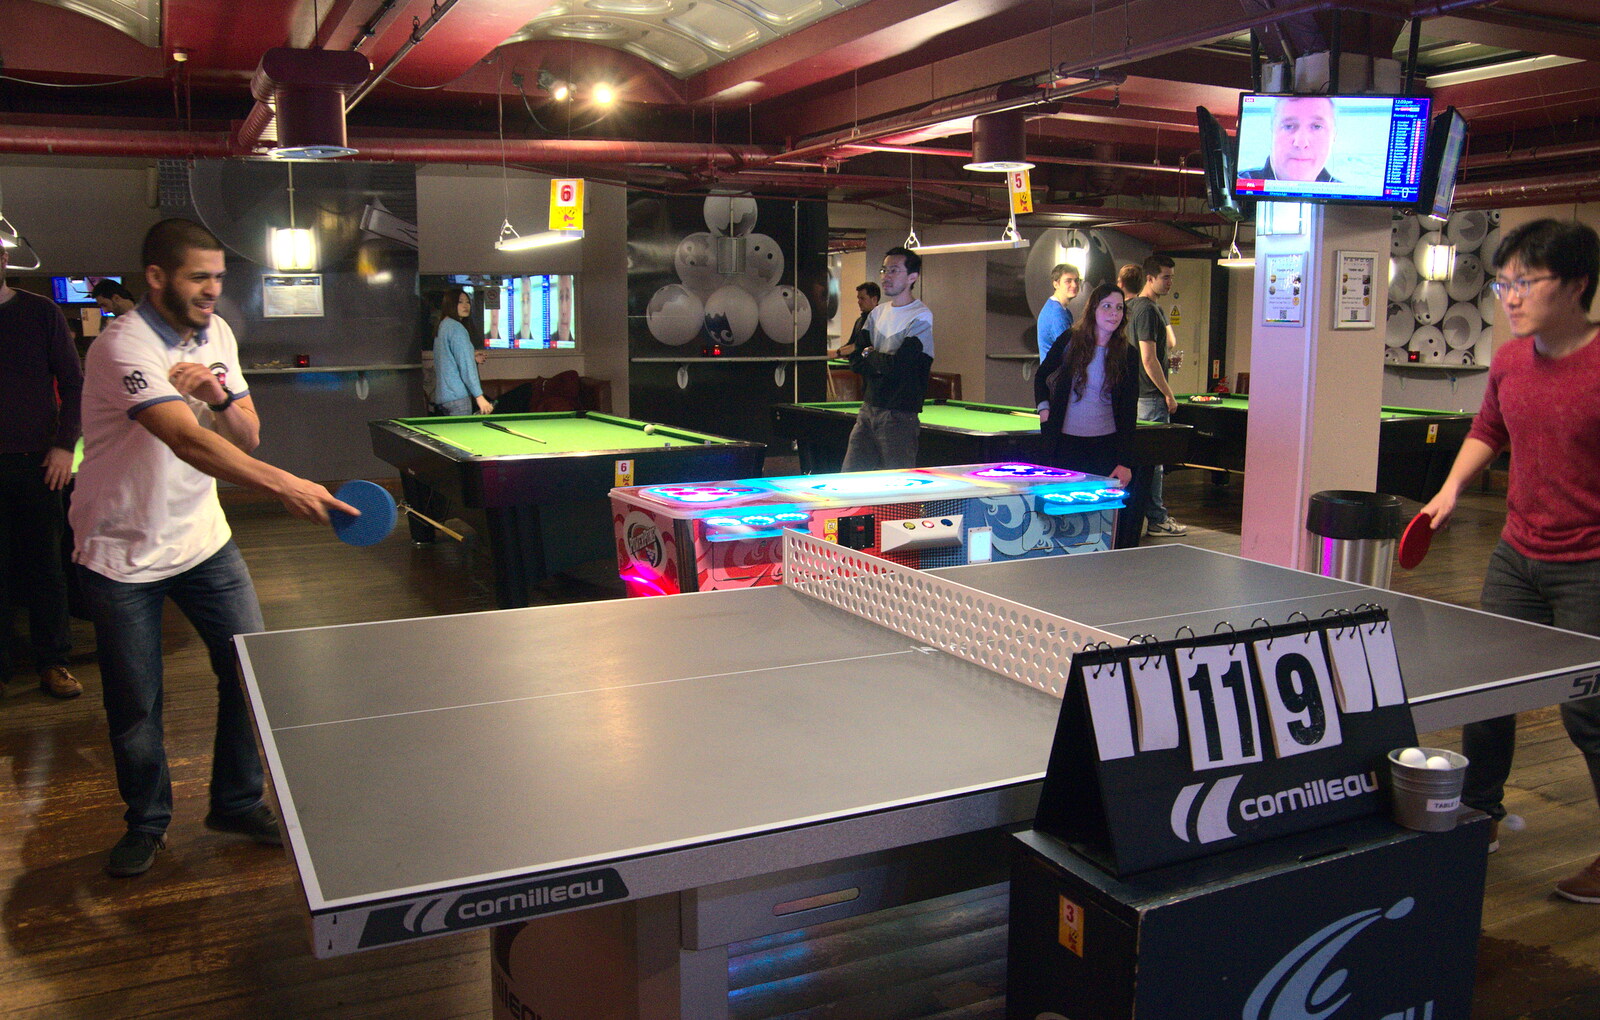 Hak and Dongyi play table tennis from A Team Outing at Namco Funscape, South Bank, London - 27th March 2019